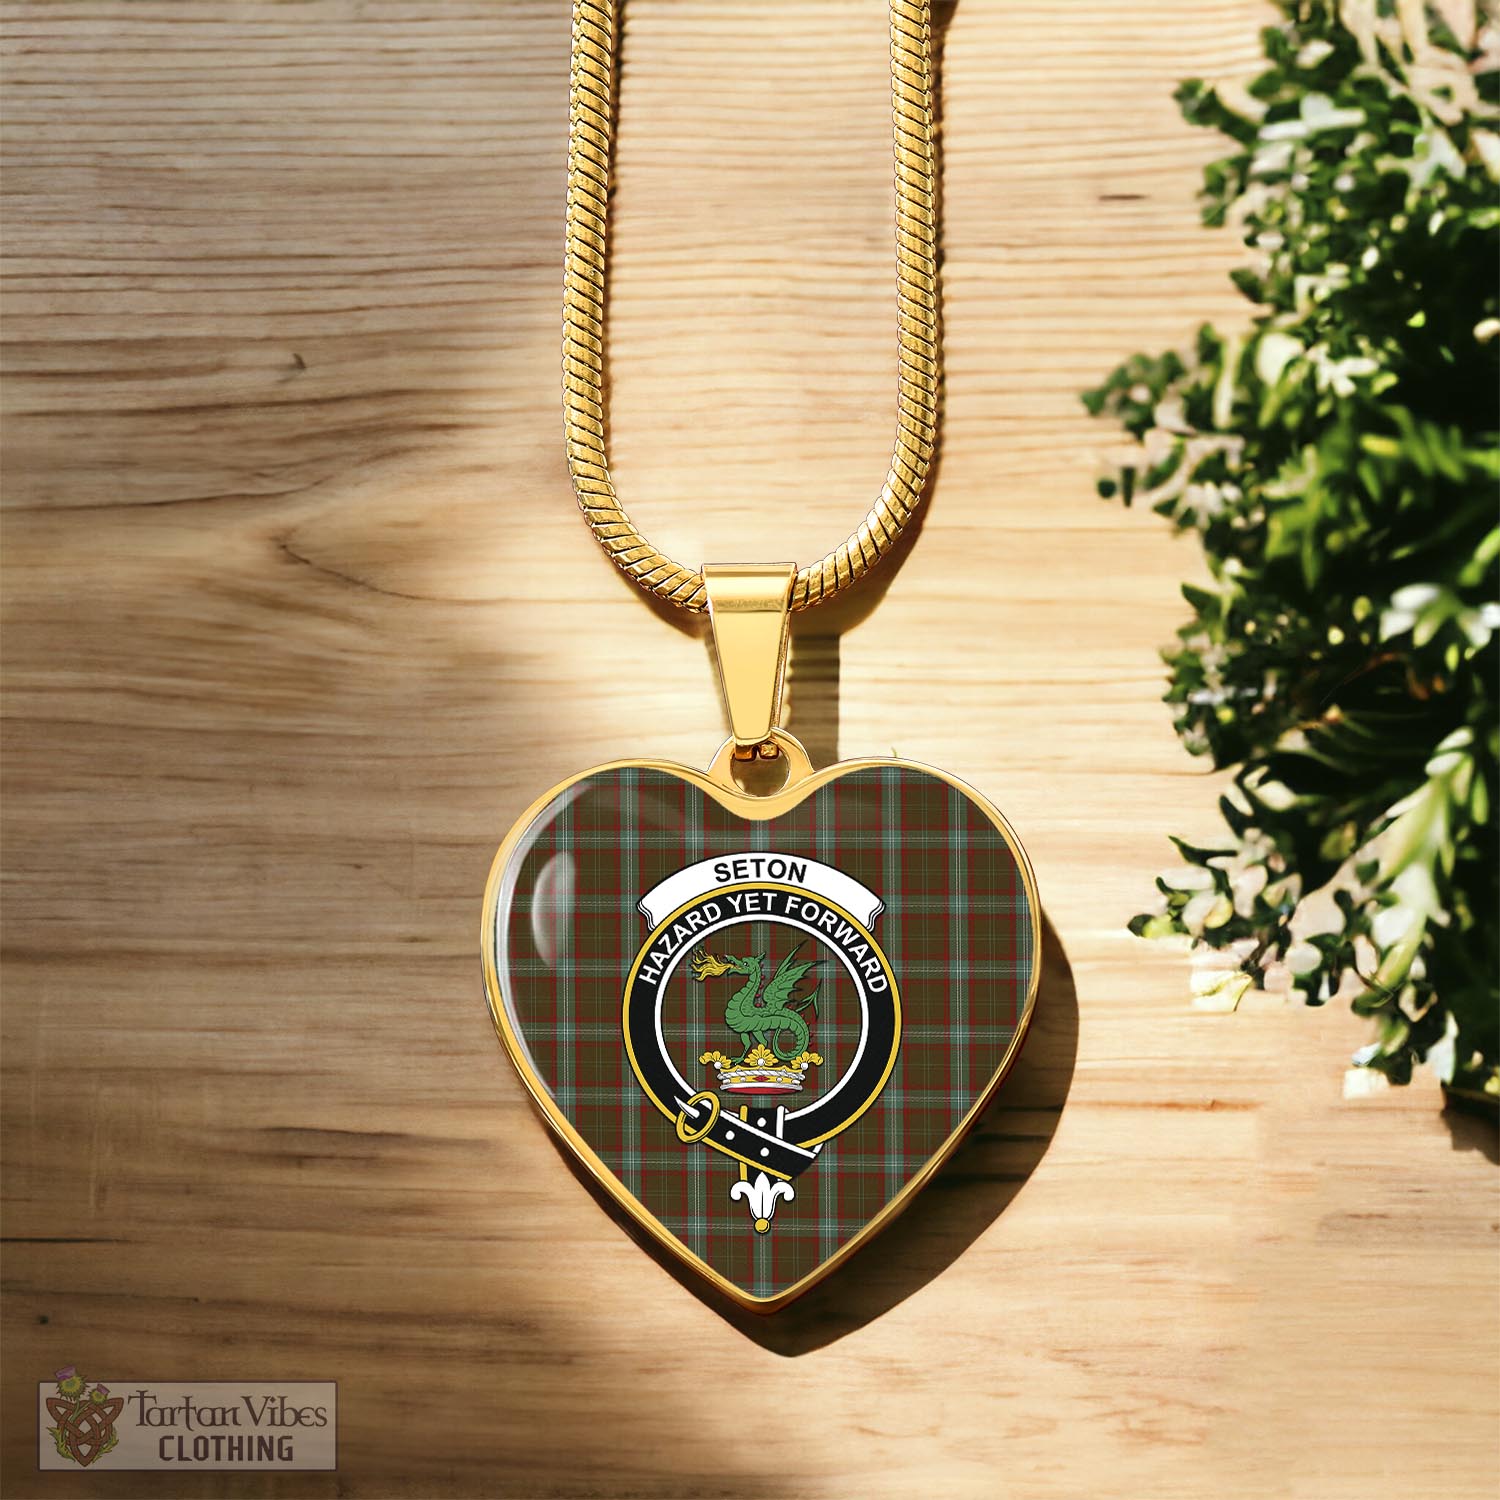 Tartan Vibes Clothing Seton Hunting Tartan Heart Necklace with Family Crest